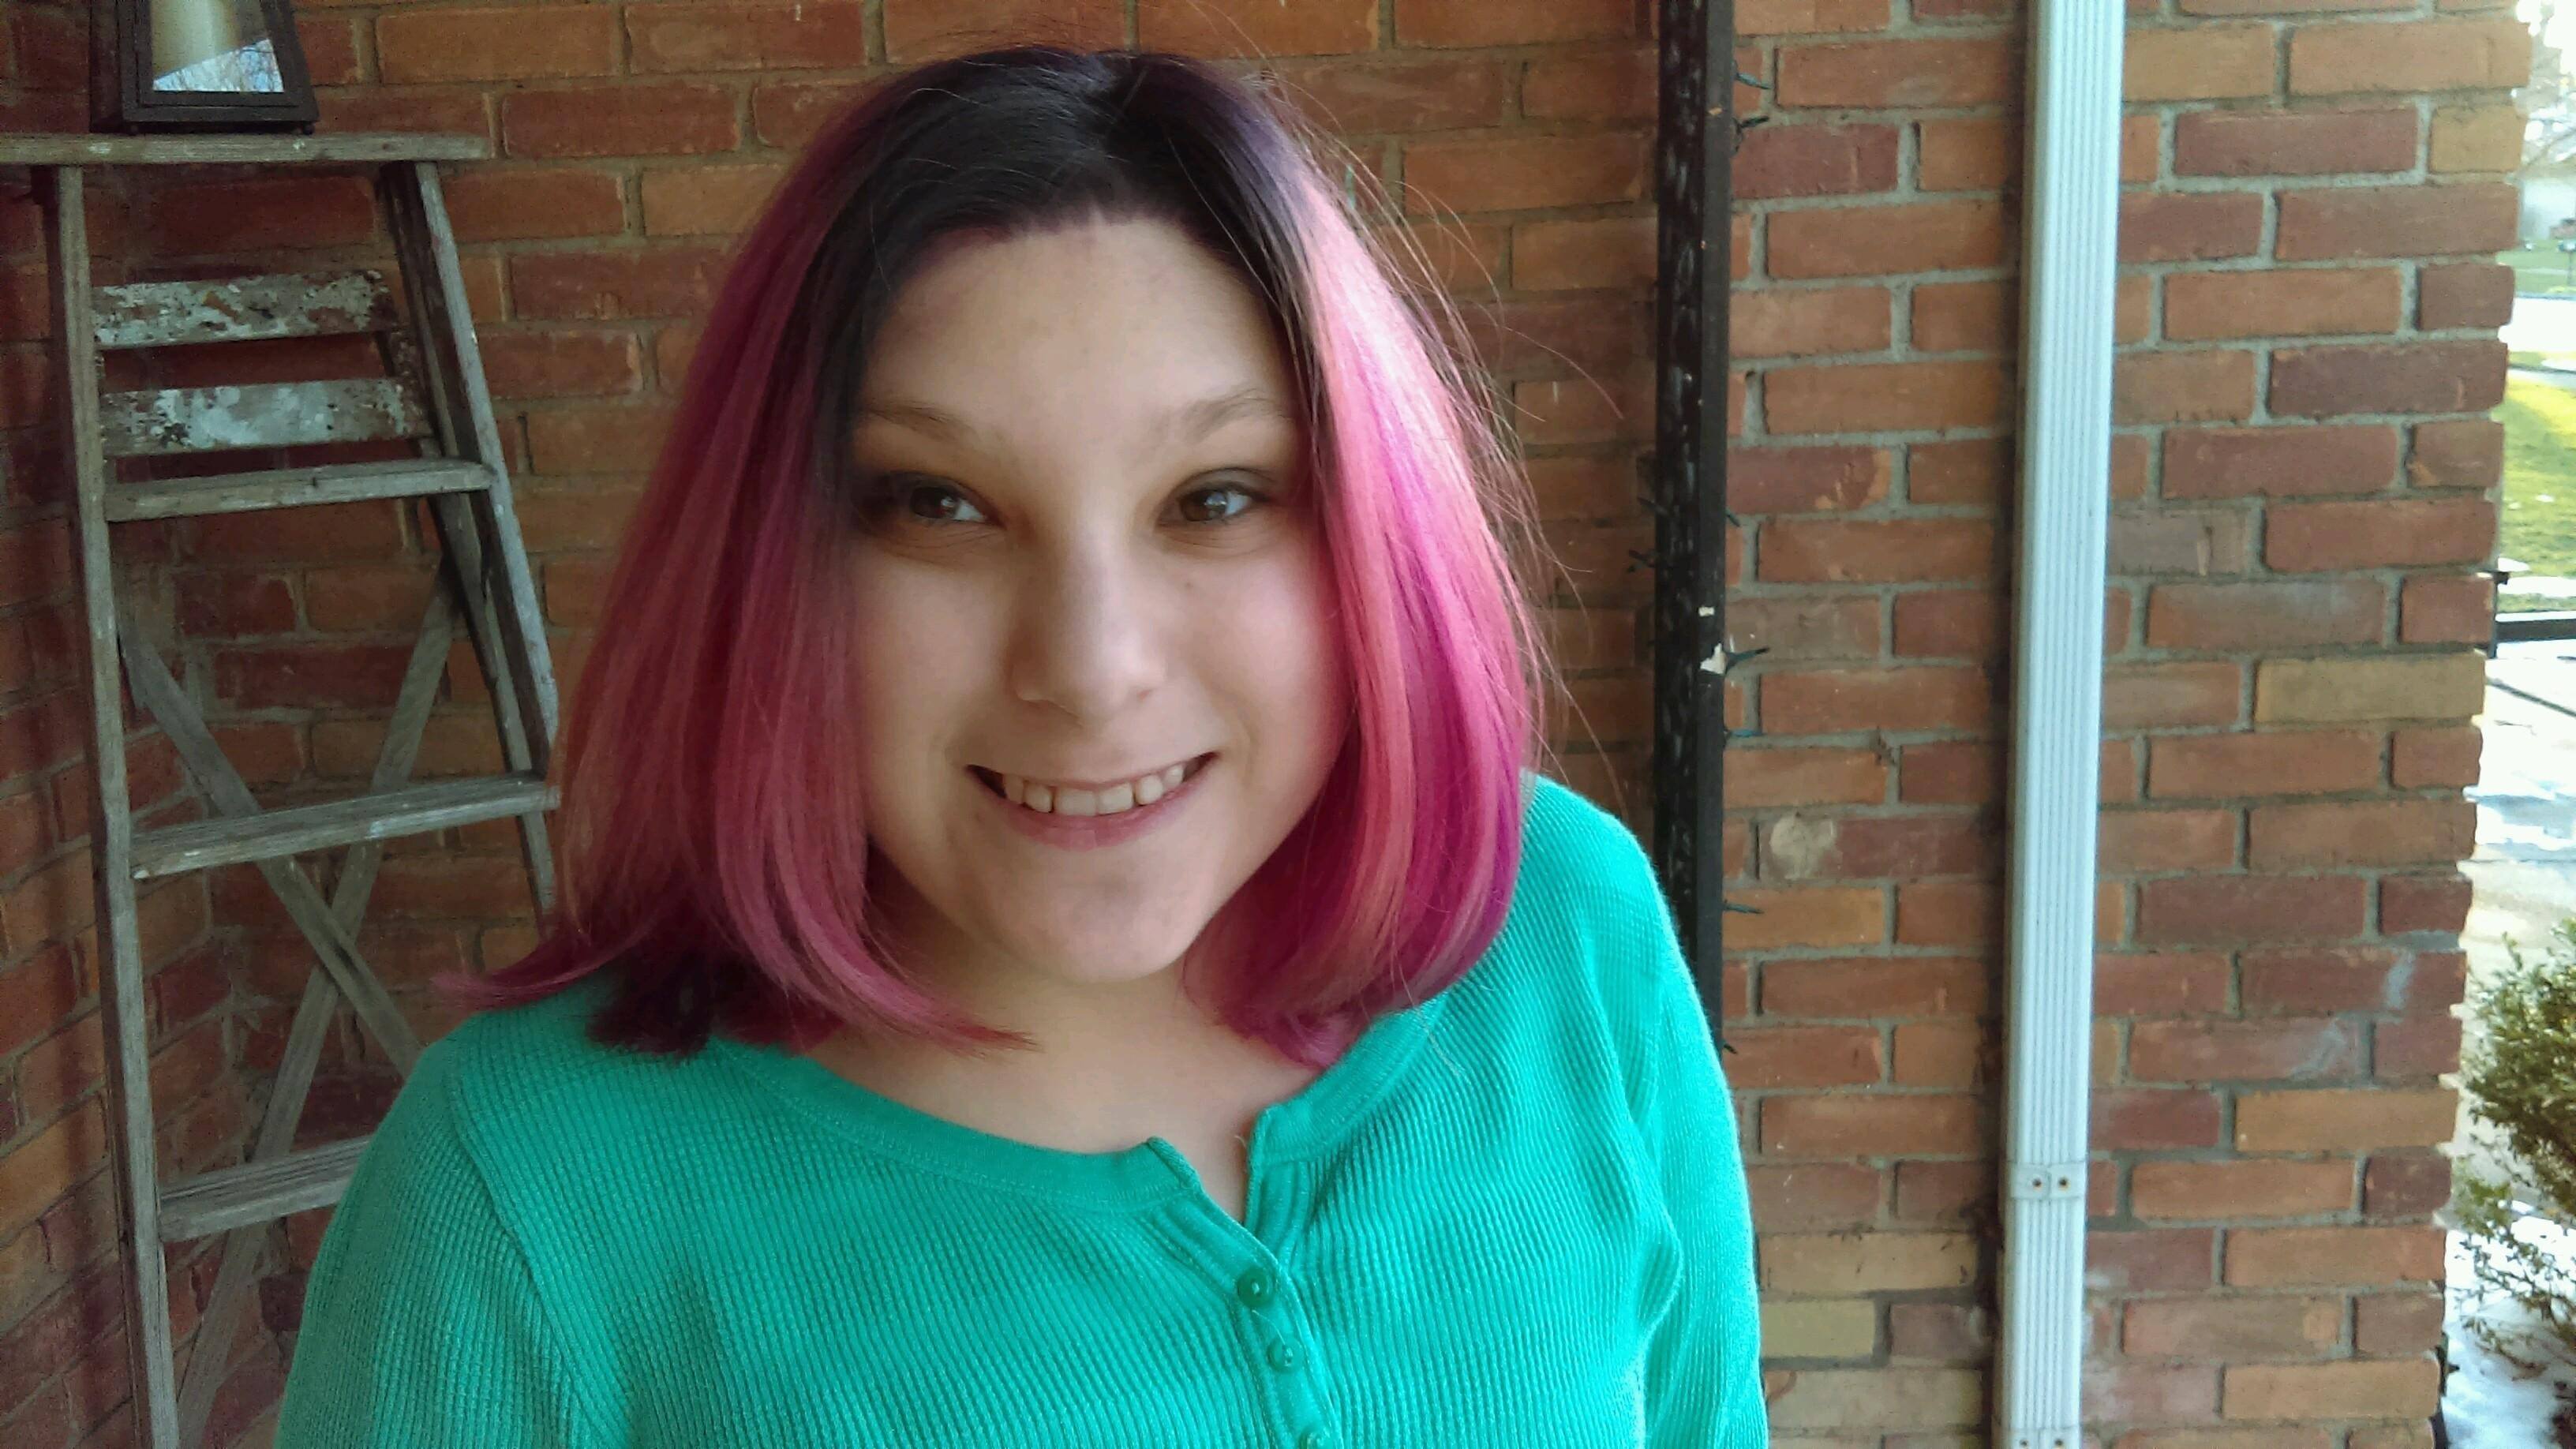 Smiling teen girl with pink hair